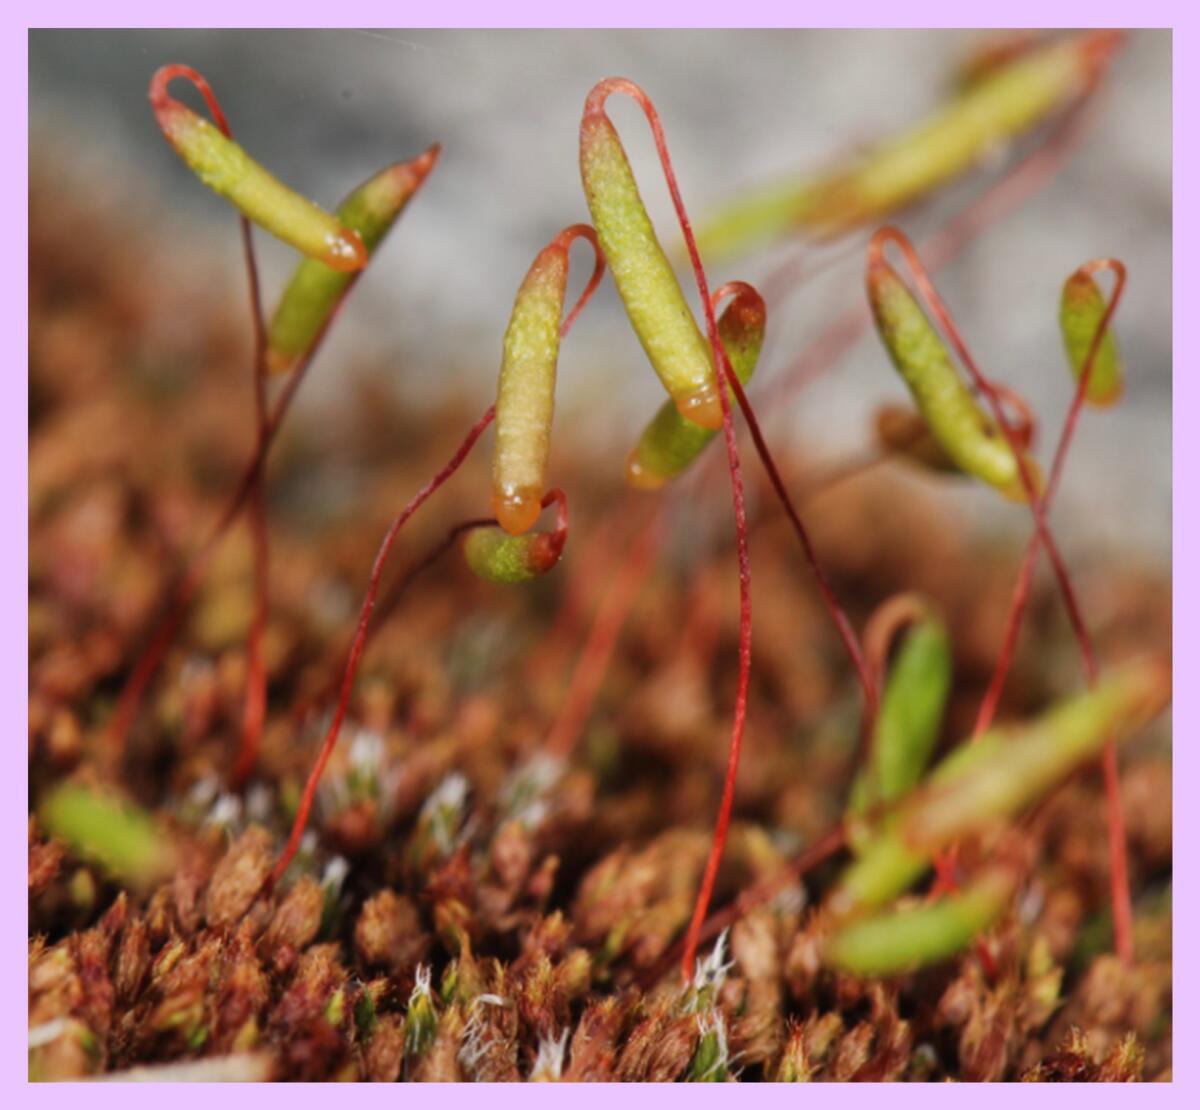 Sprouts shoot out from moss in a close-up photo.